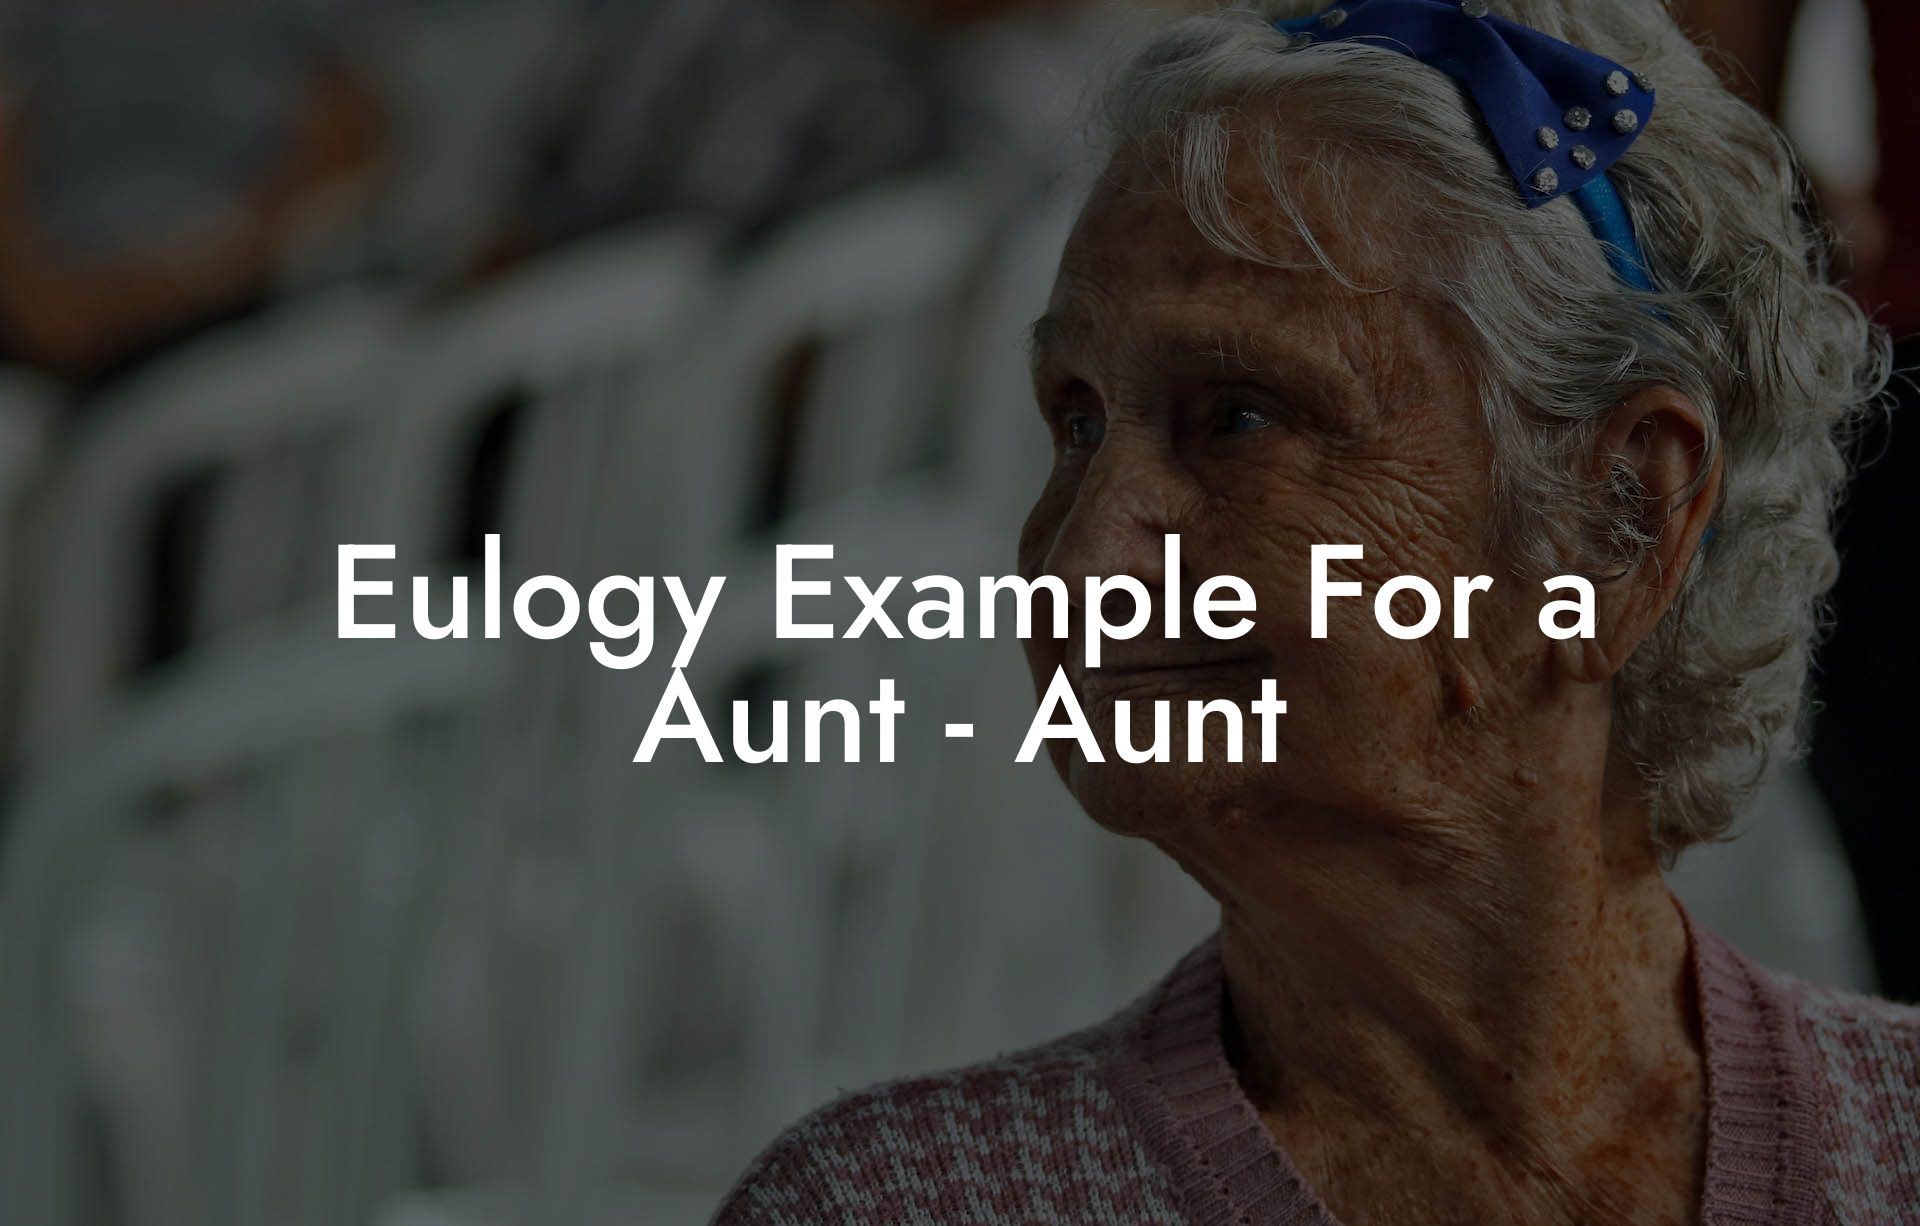 Eulogy Example For a Aunt - Aunt